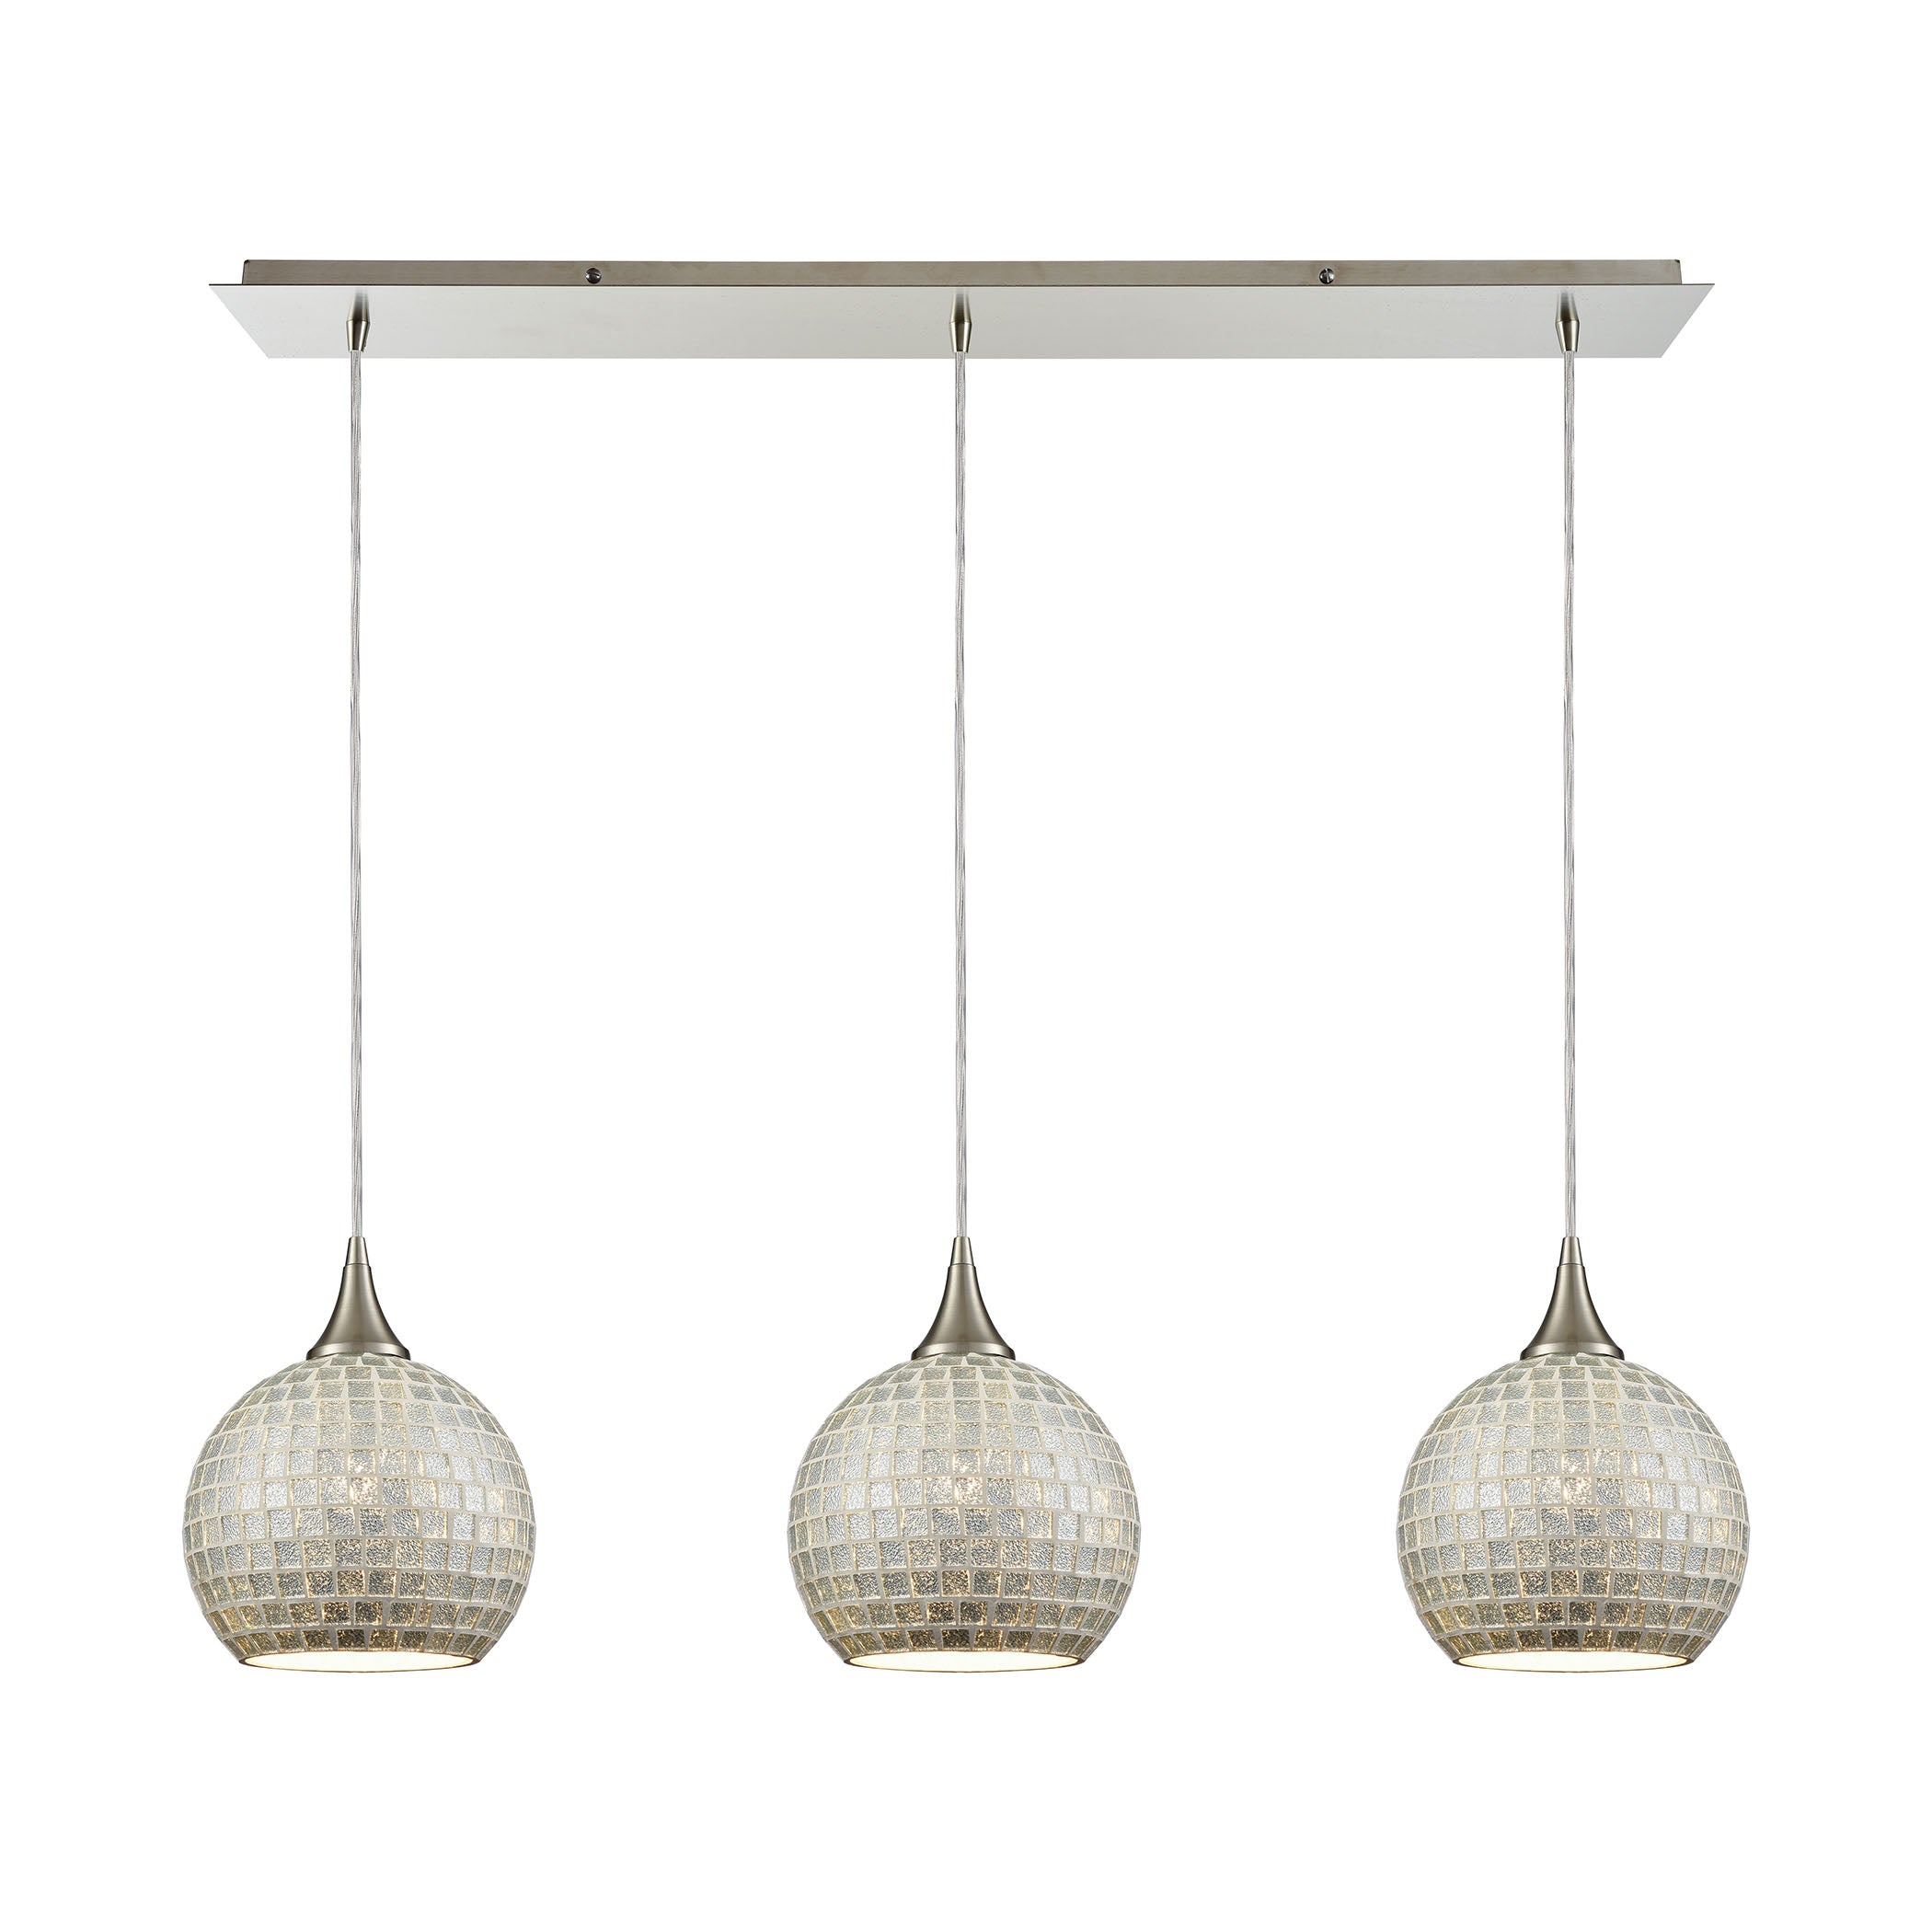 ELK Lighting 529-3LP-SLV Fusion 3-Light Linear Mini Pendant Fixture in Satin Nickel with Silver Mosaic Glass